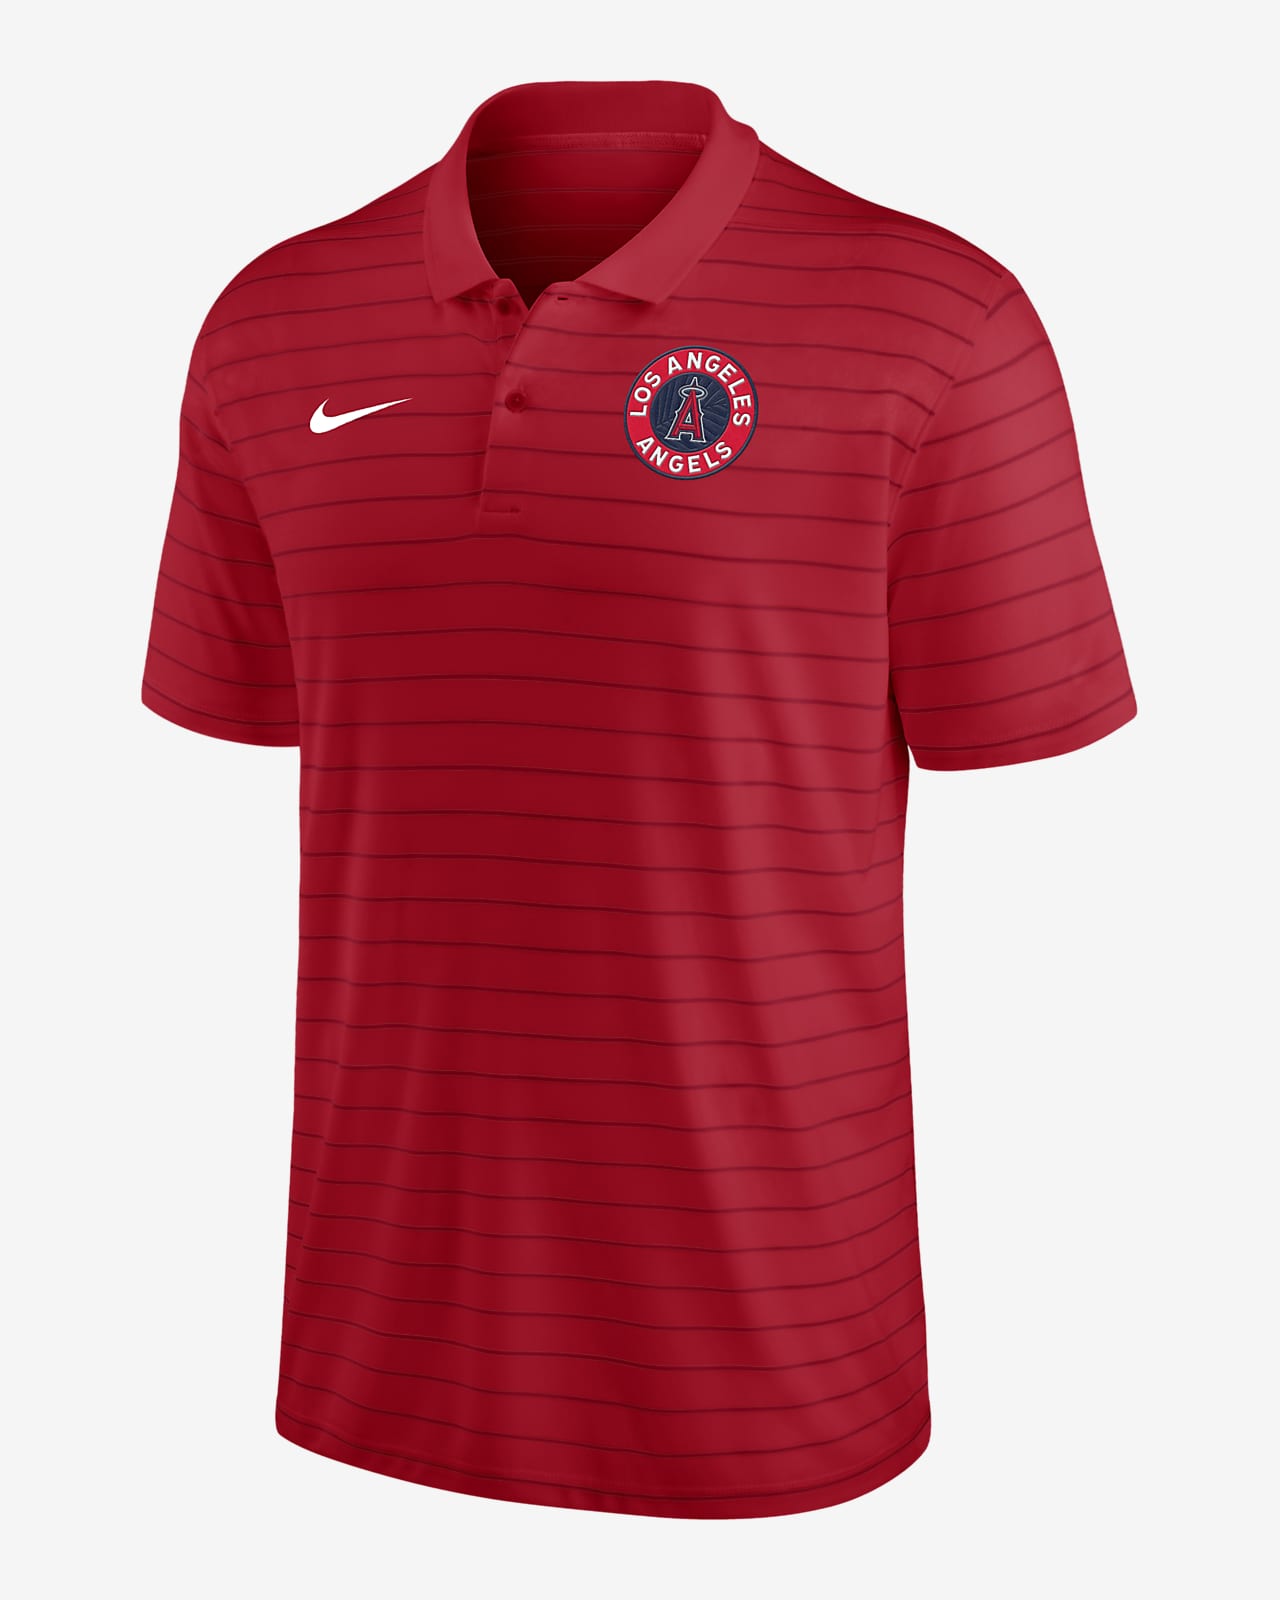 Nike Dri-FIT Victory Striped (MLB Chicago Cubs) Men's Polo. Nike